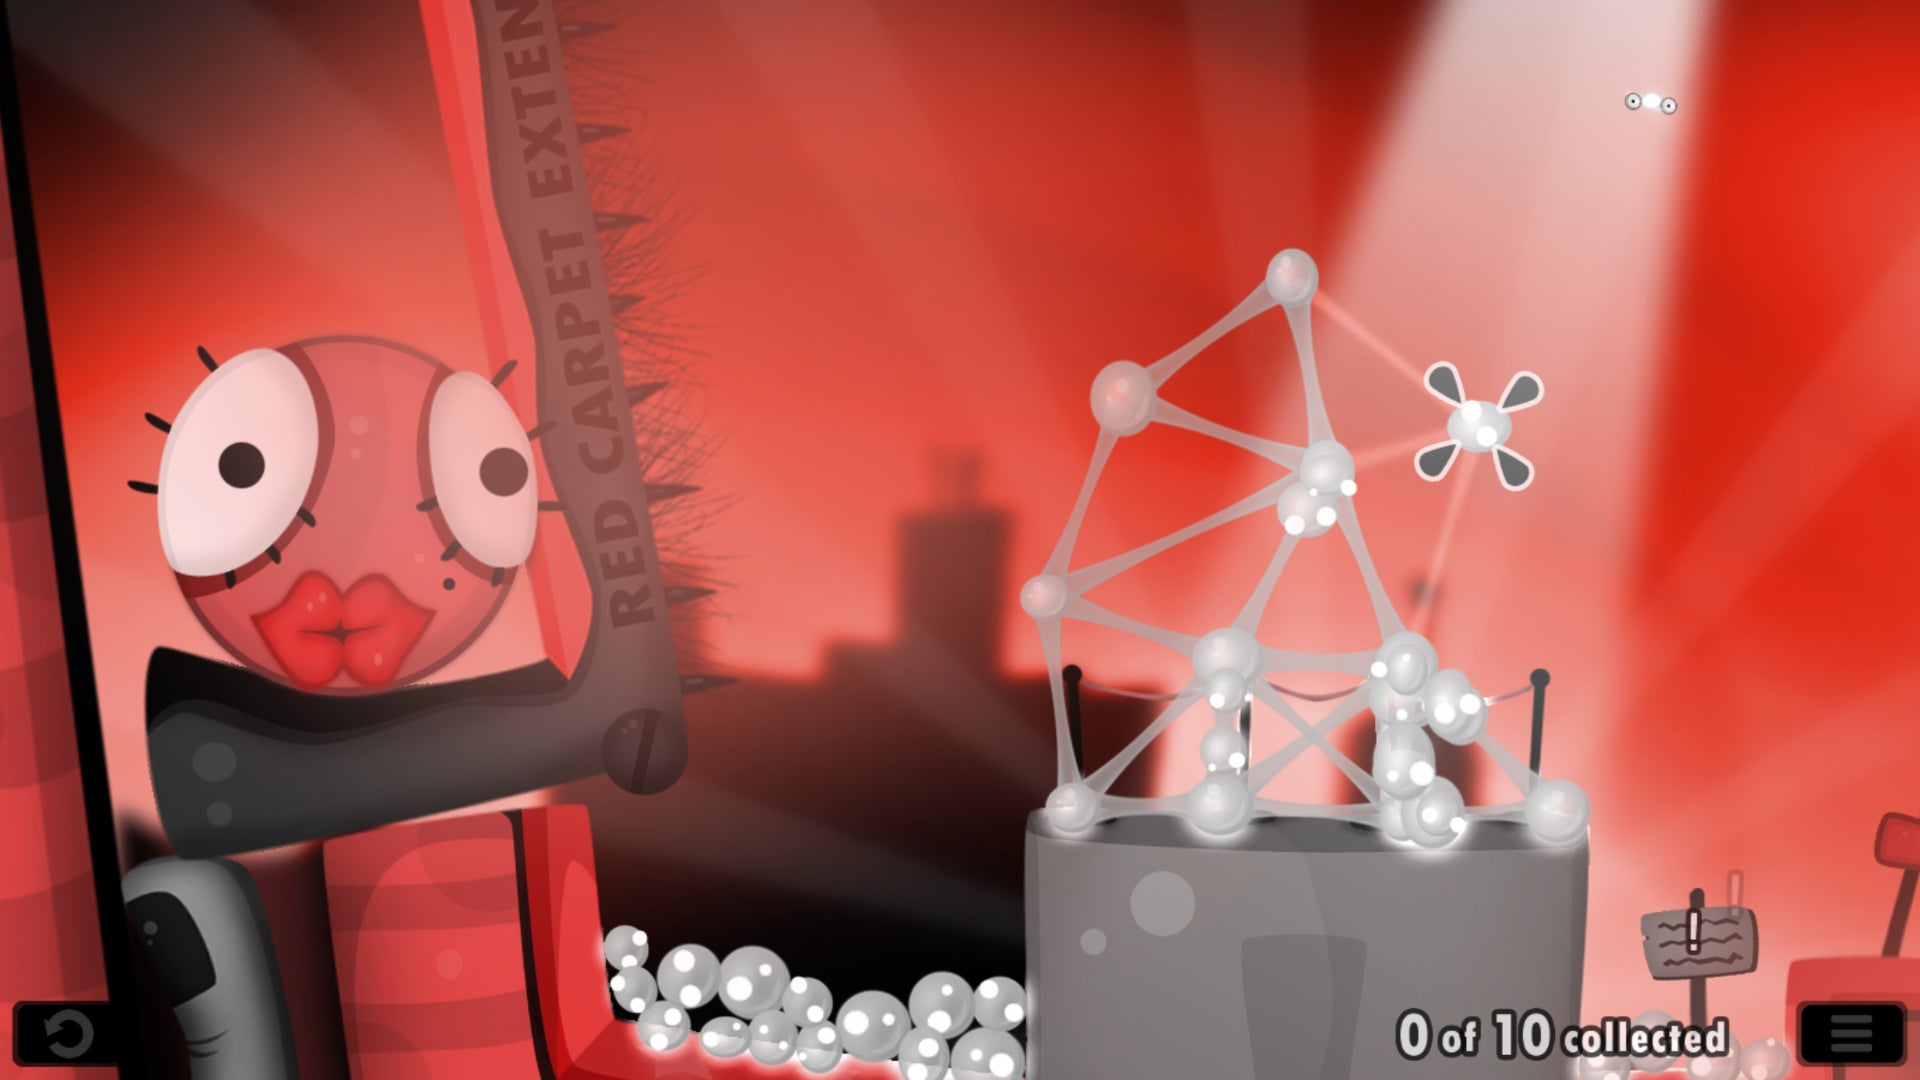 A level in World Of Goo with a structure of white goo balls on the right, and a giant red Goo ball on the left awaiting its freedom.